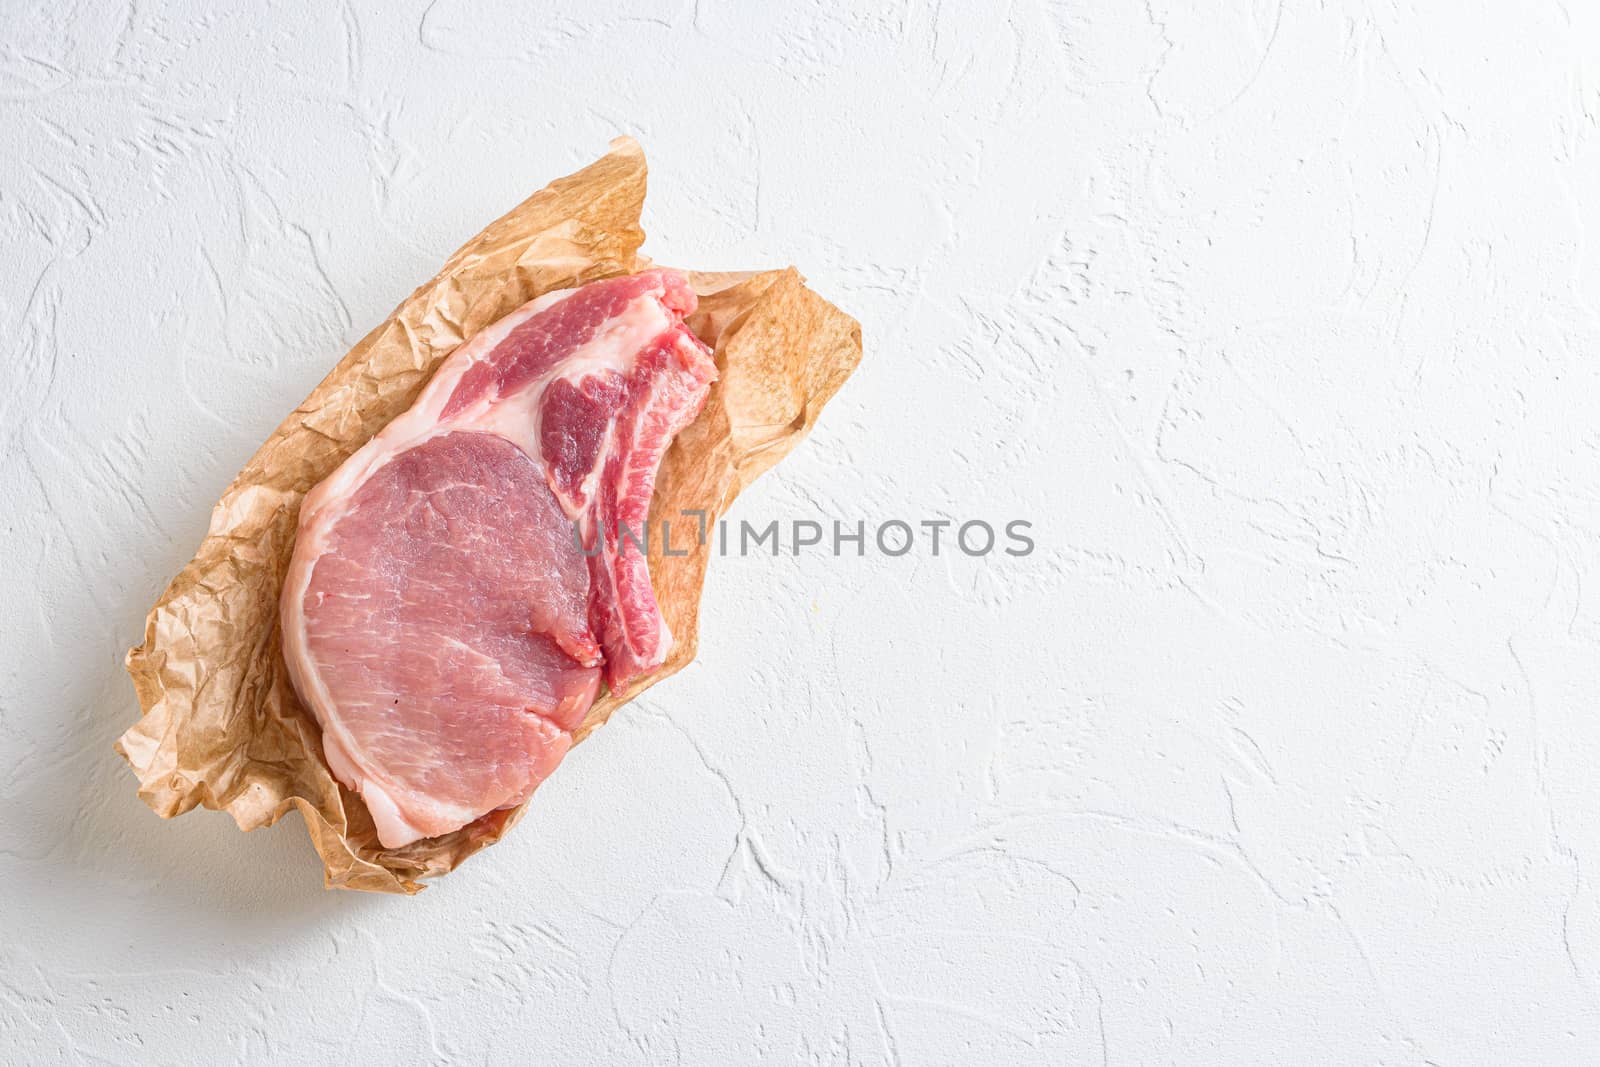 Raw organic pork chop steak top wiev on white textured background top view with space for your text by Ilianesolenyi